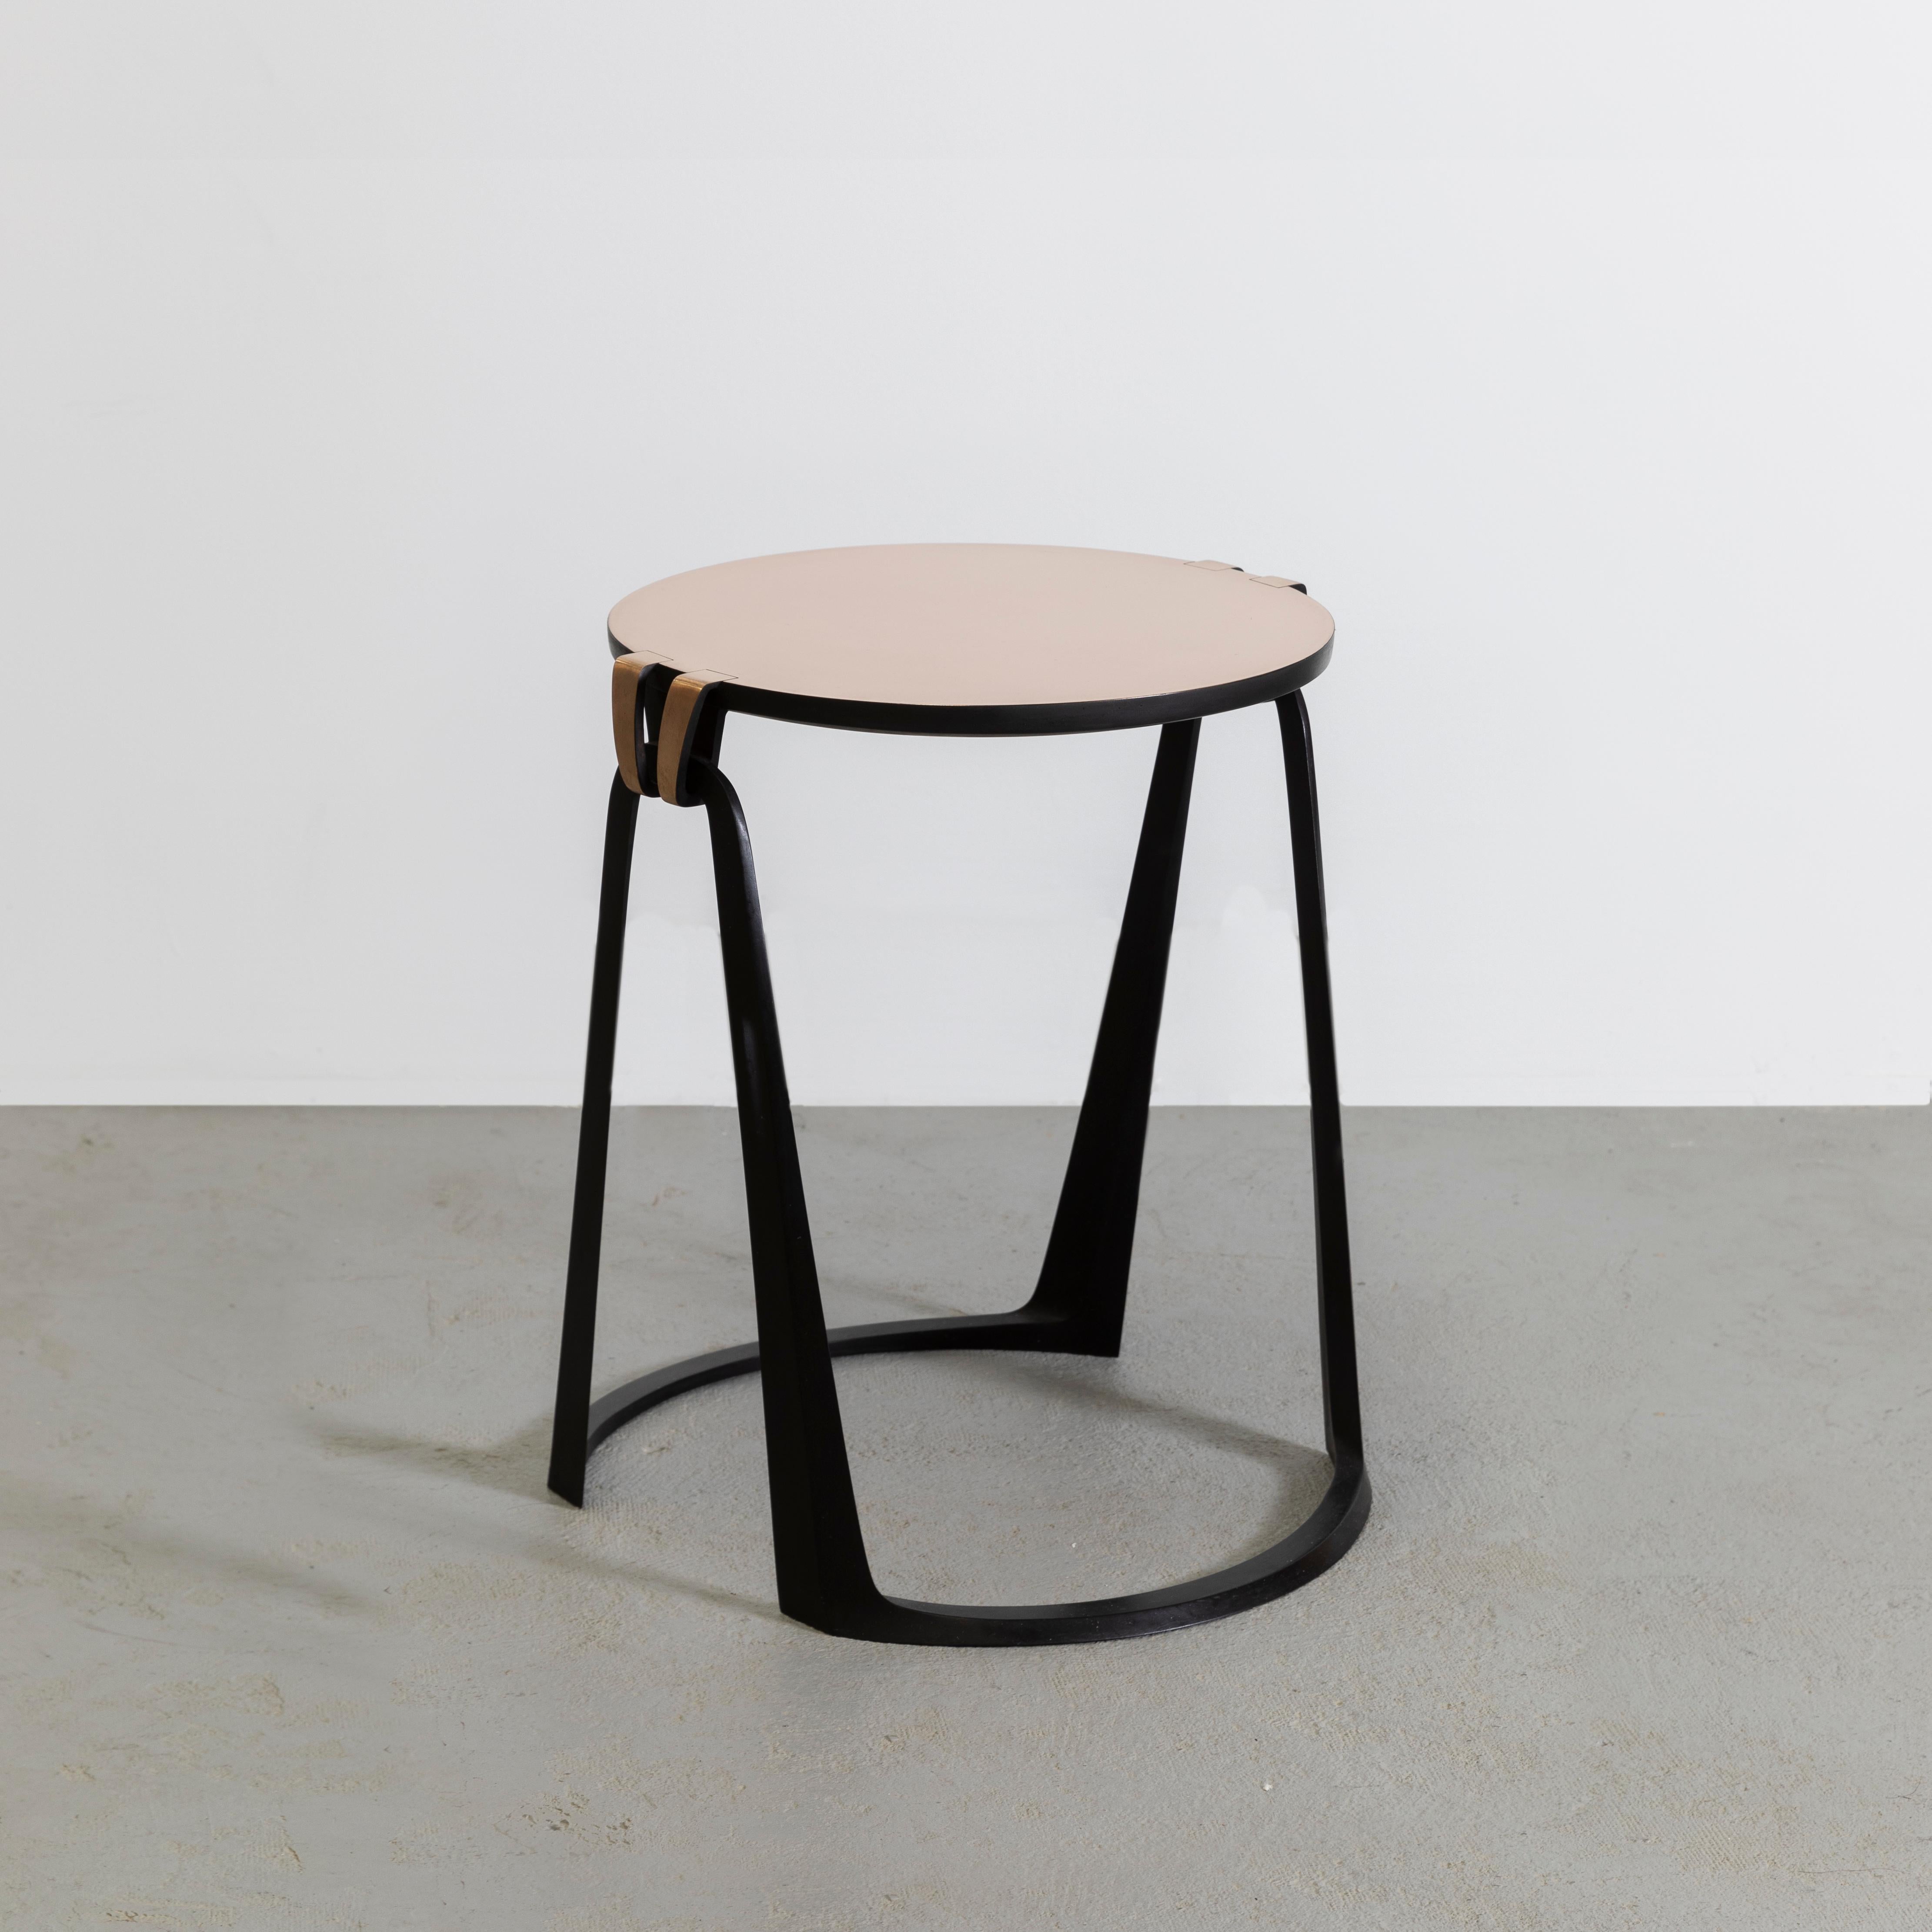 Side table in bronze with a semi-polished top and legs in black patina. 